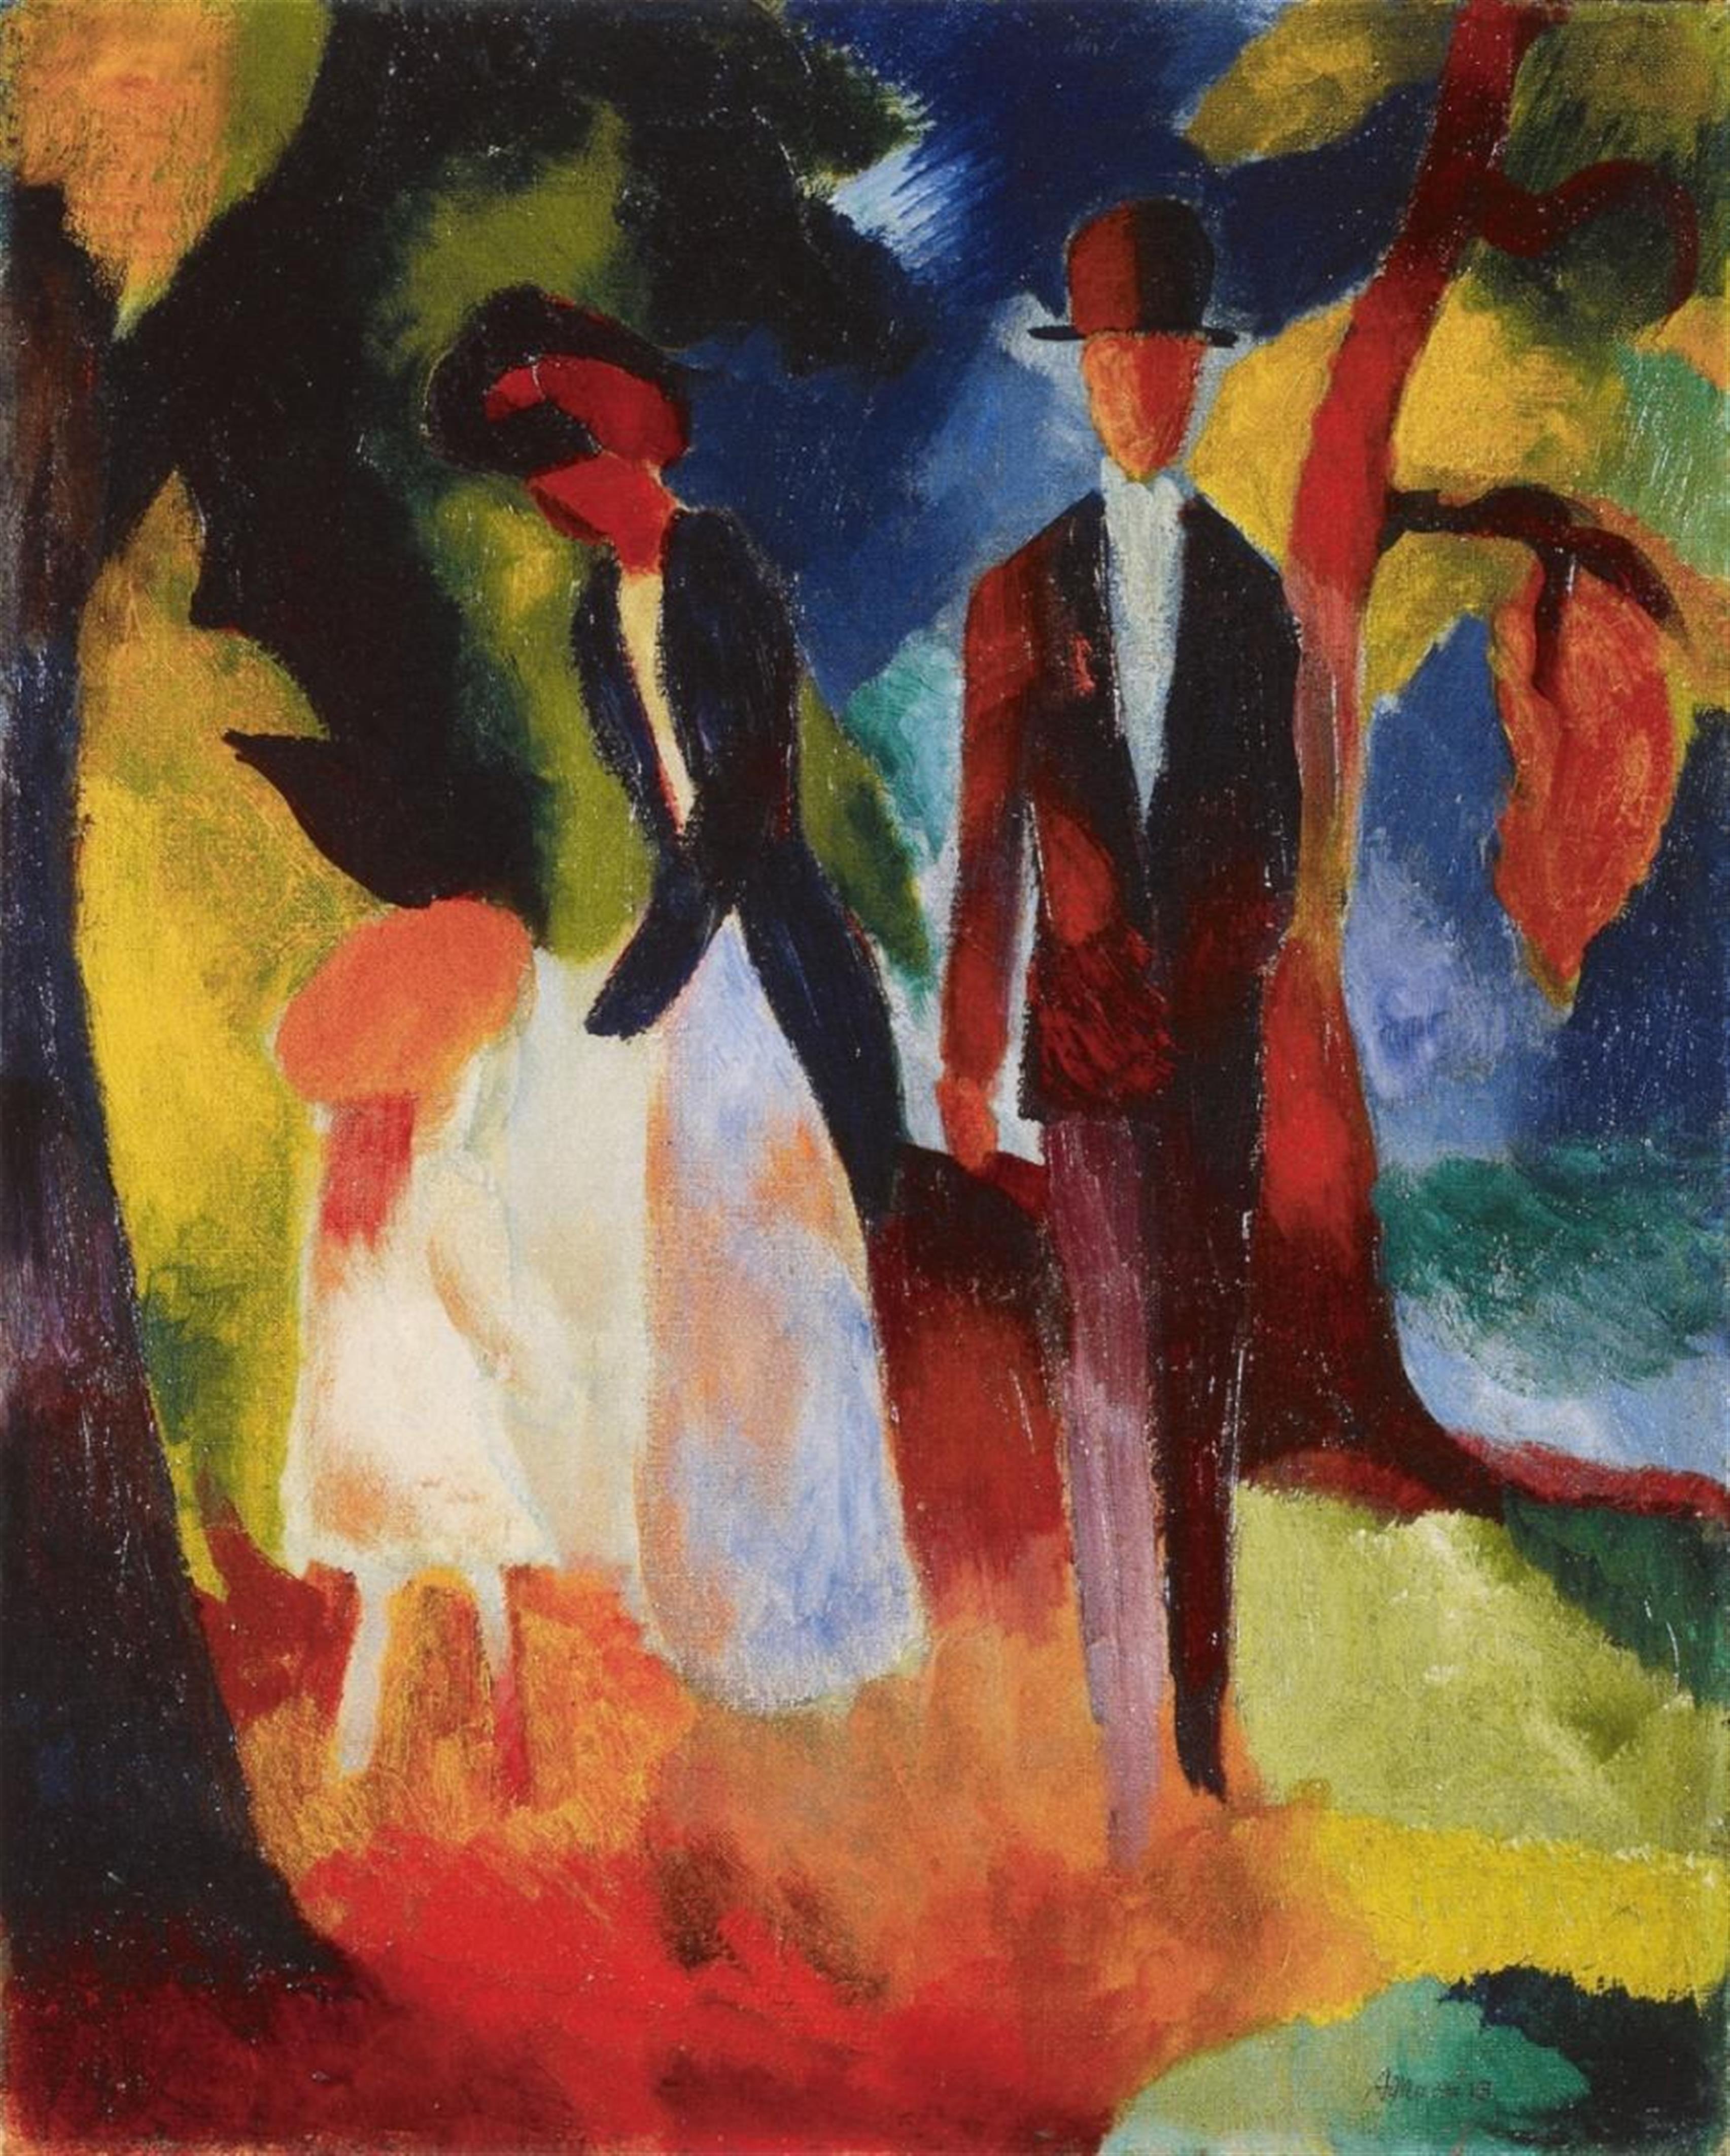 August Macke - Spaziergänger am See (Promenade at the lake) - image-2